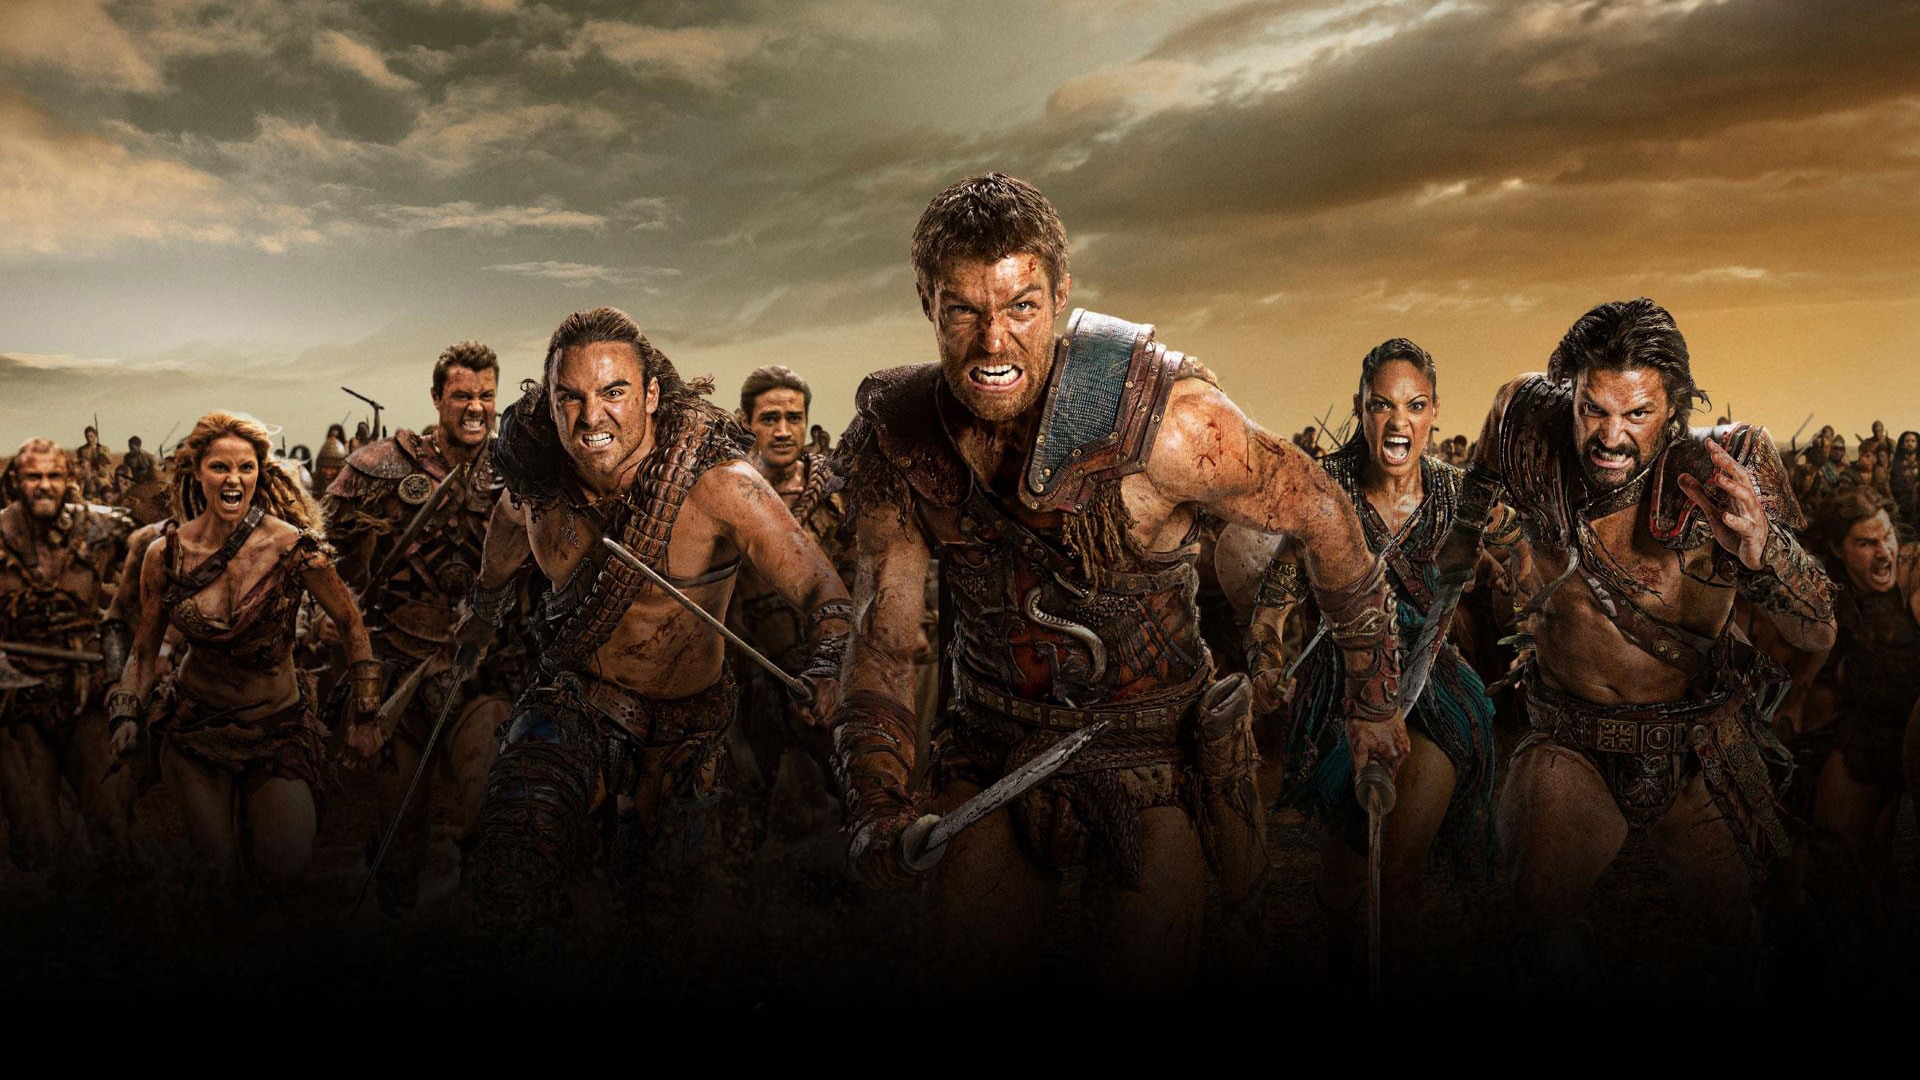 Spartacus War of the Damned for 1920 x 1080 HDTV 1080p resolution